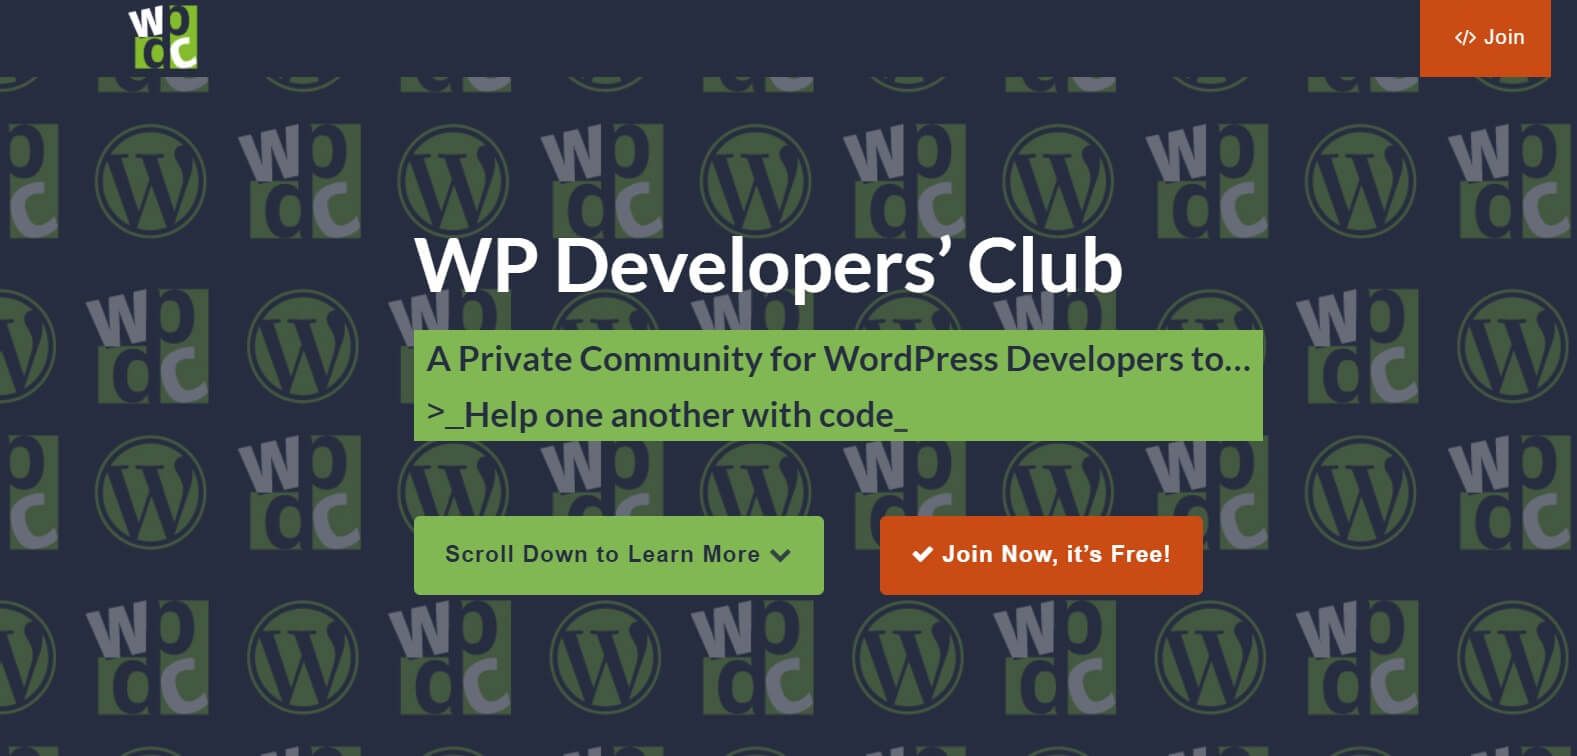 The WP Developers' Club website homepage